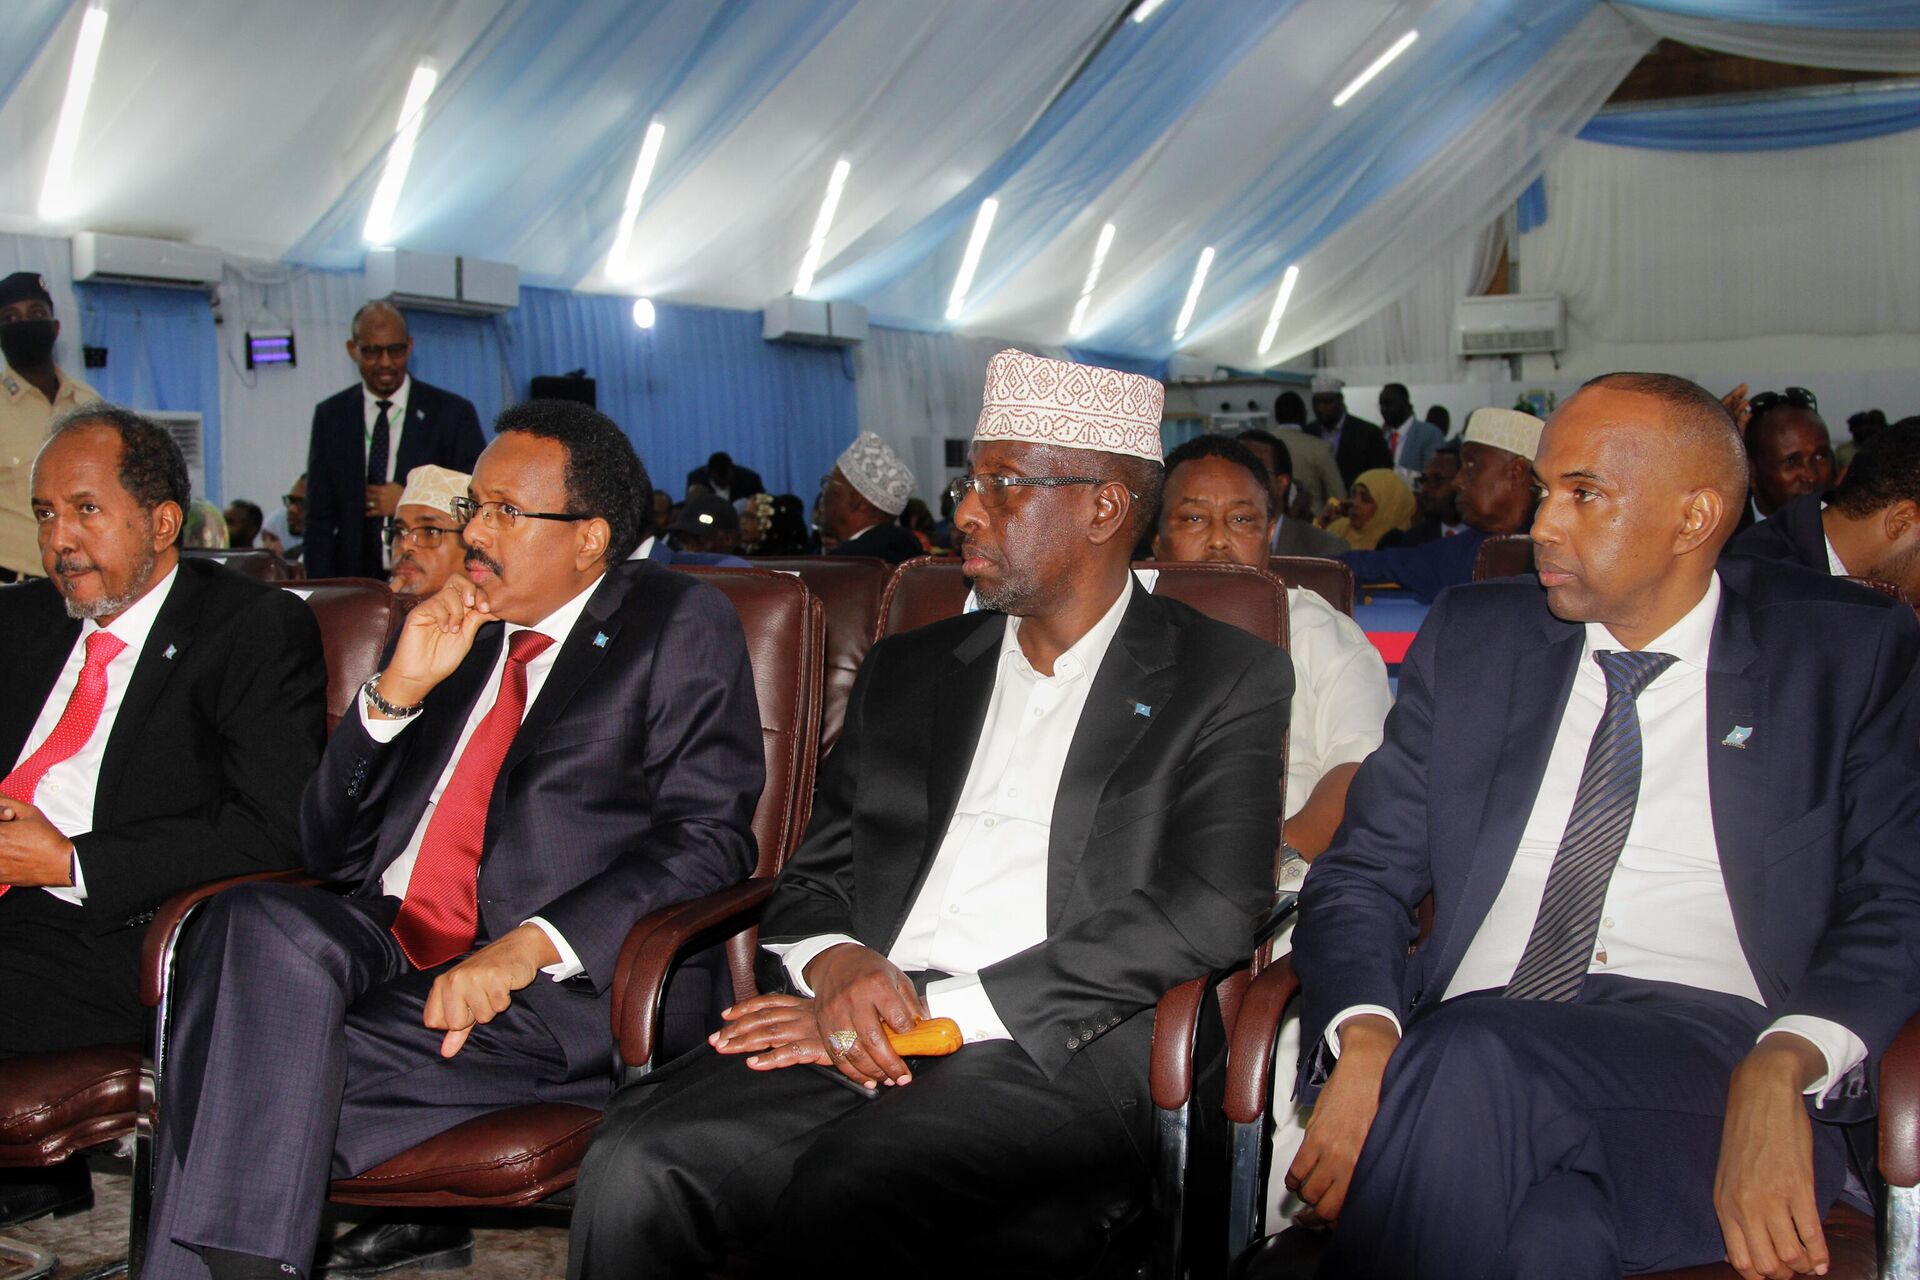 From left to right, former president Hassan Sheikh Mohamud, incumbent leader Mohamed Abdullahi Mohamed, former president Sharif Sheikh Ahmed, and former prime minister Hassan Ali Khaire, attend a voting session for the presidential election, at the Halane military camp which is protected by African Union peacekeepers, in Mogadishu, Somalia Sunday, May 15, 2022. - Sputnik International, 1920, 16.05.2022